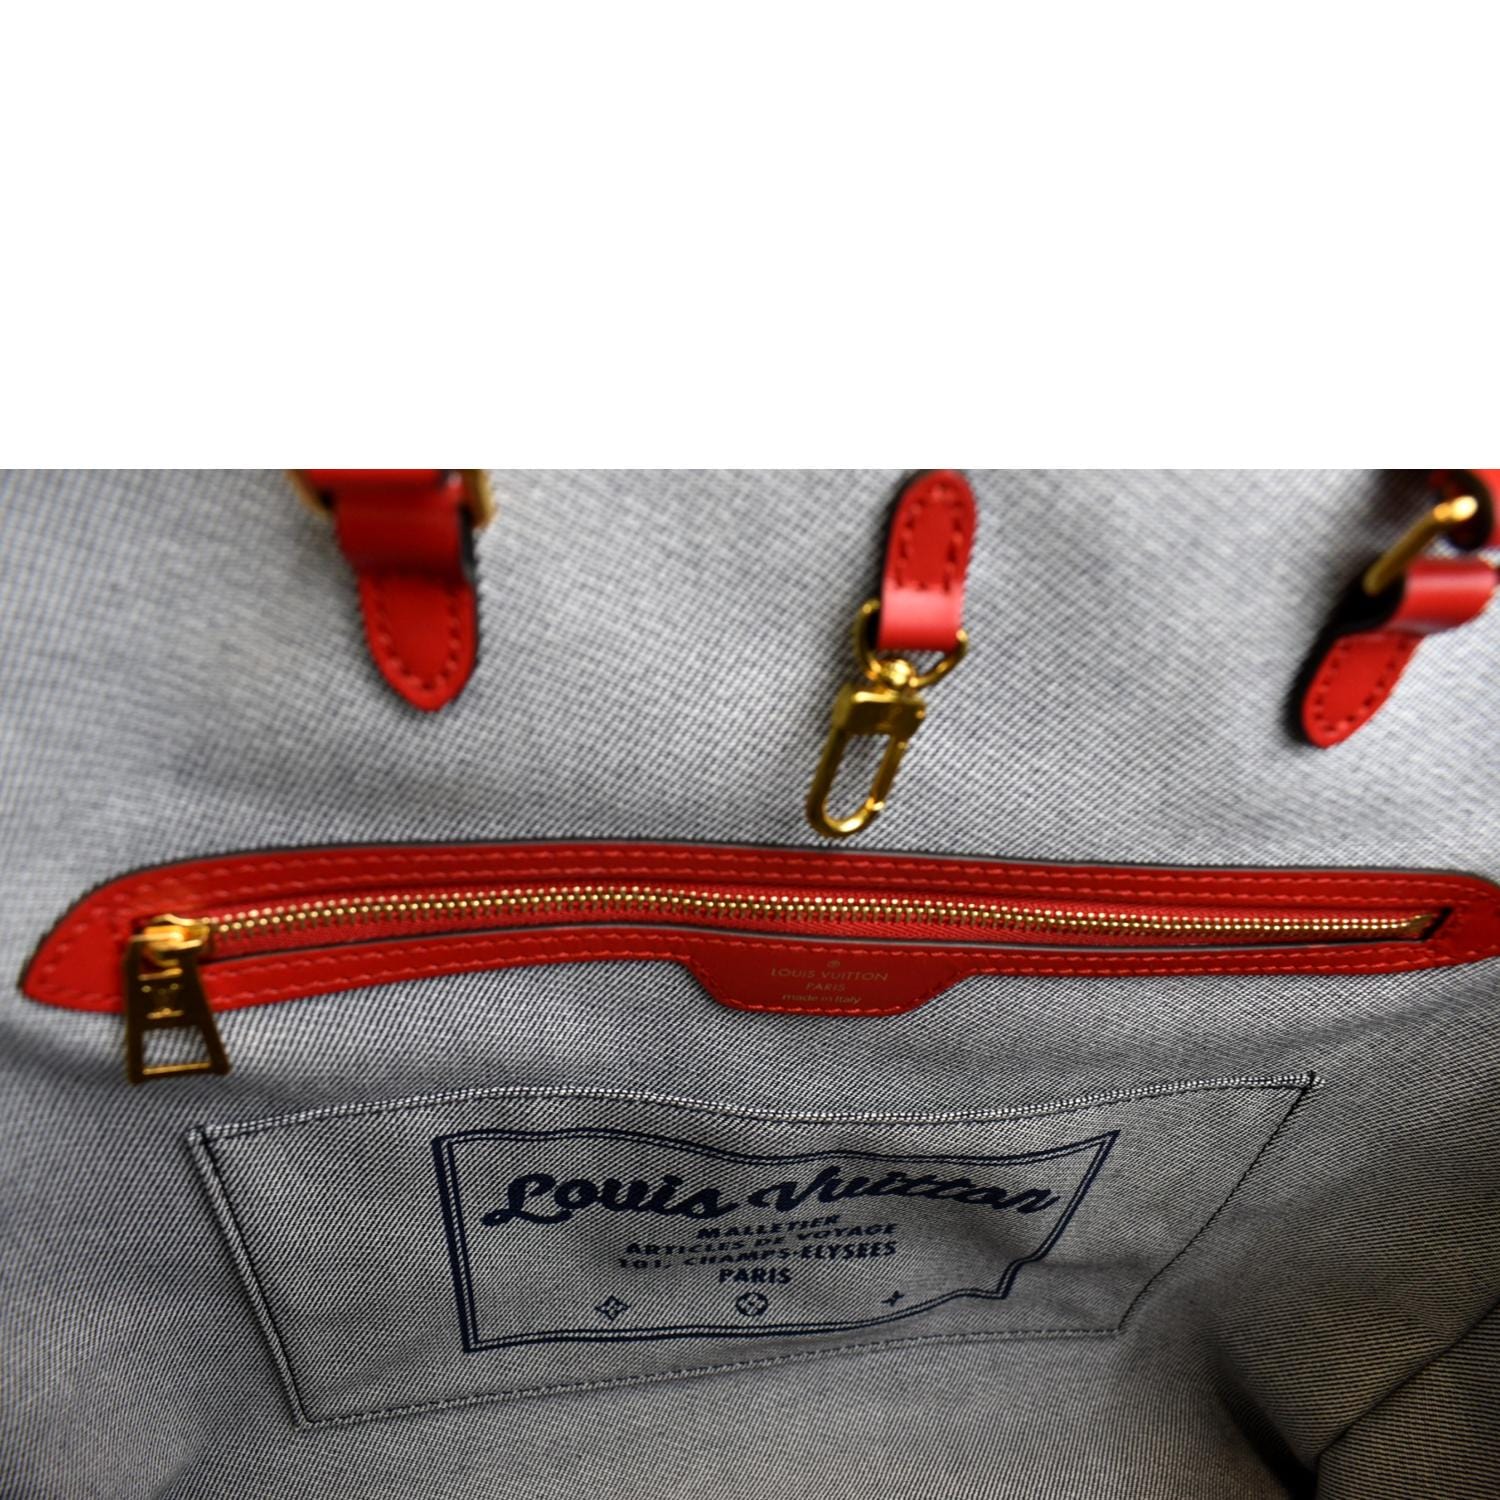 LOUIS VUITTON Onthego GM Womens tote bag M44992 blue x red Leather